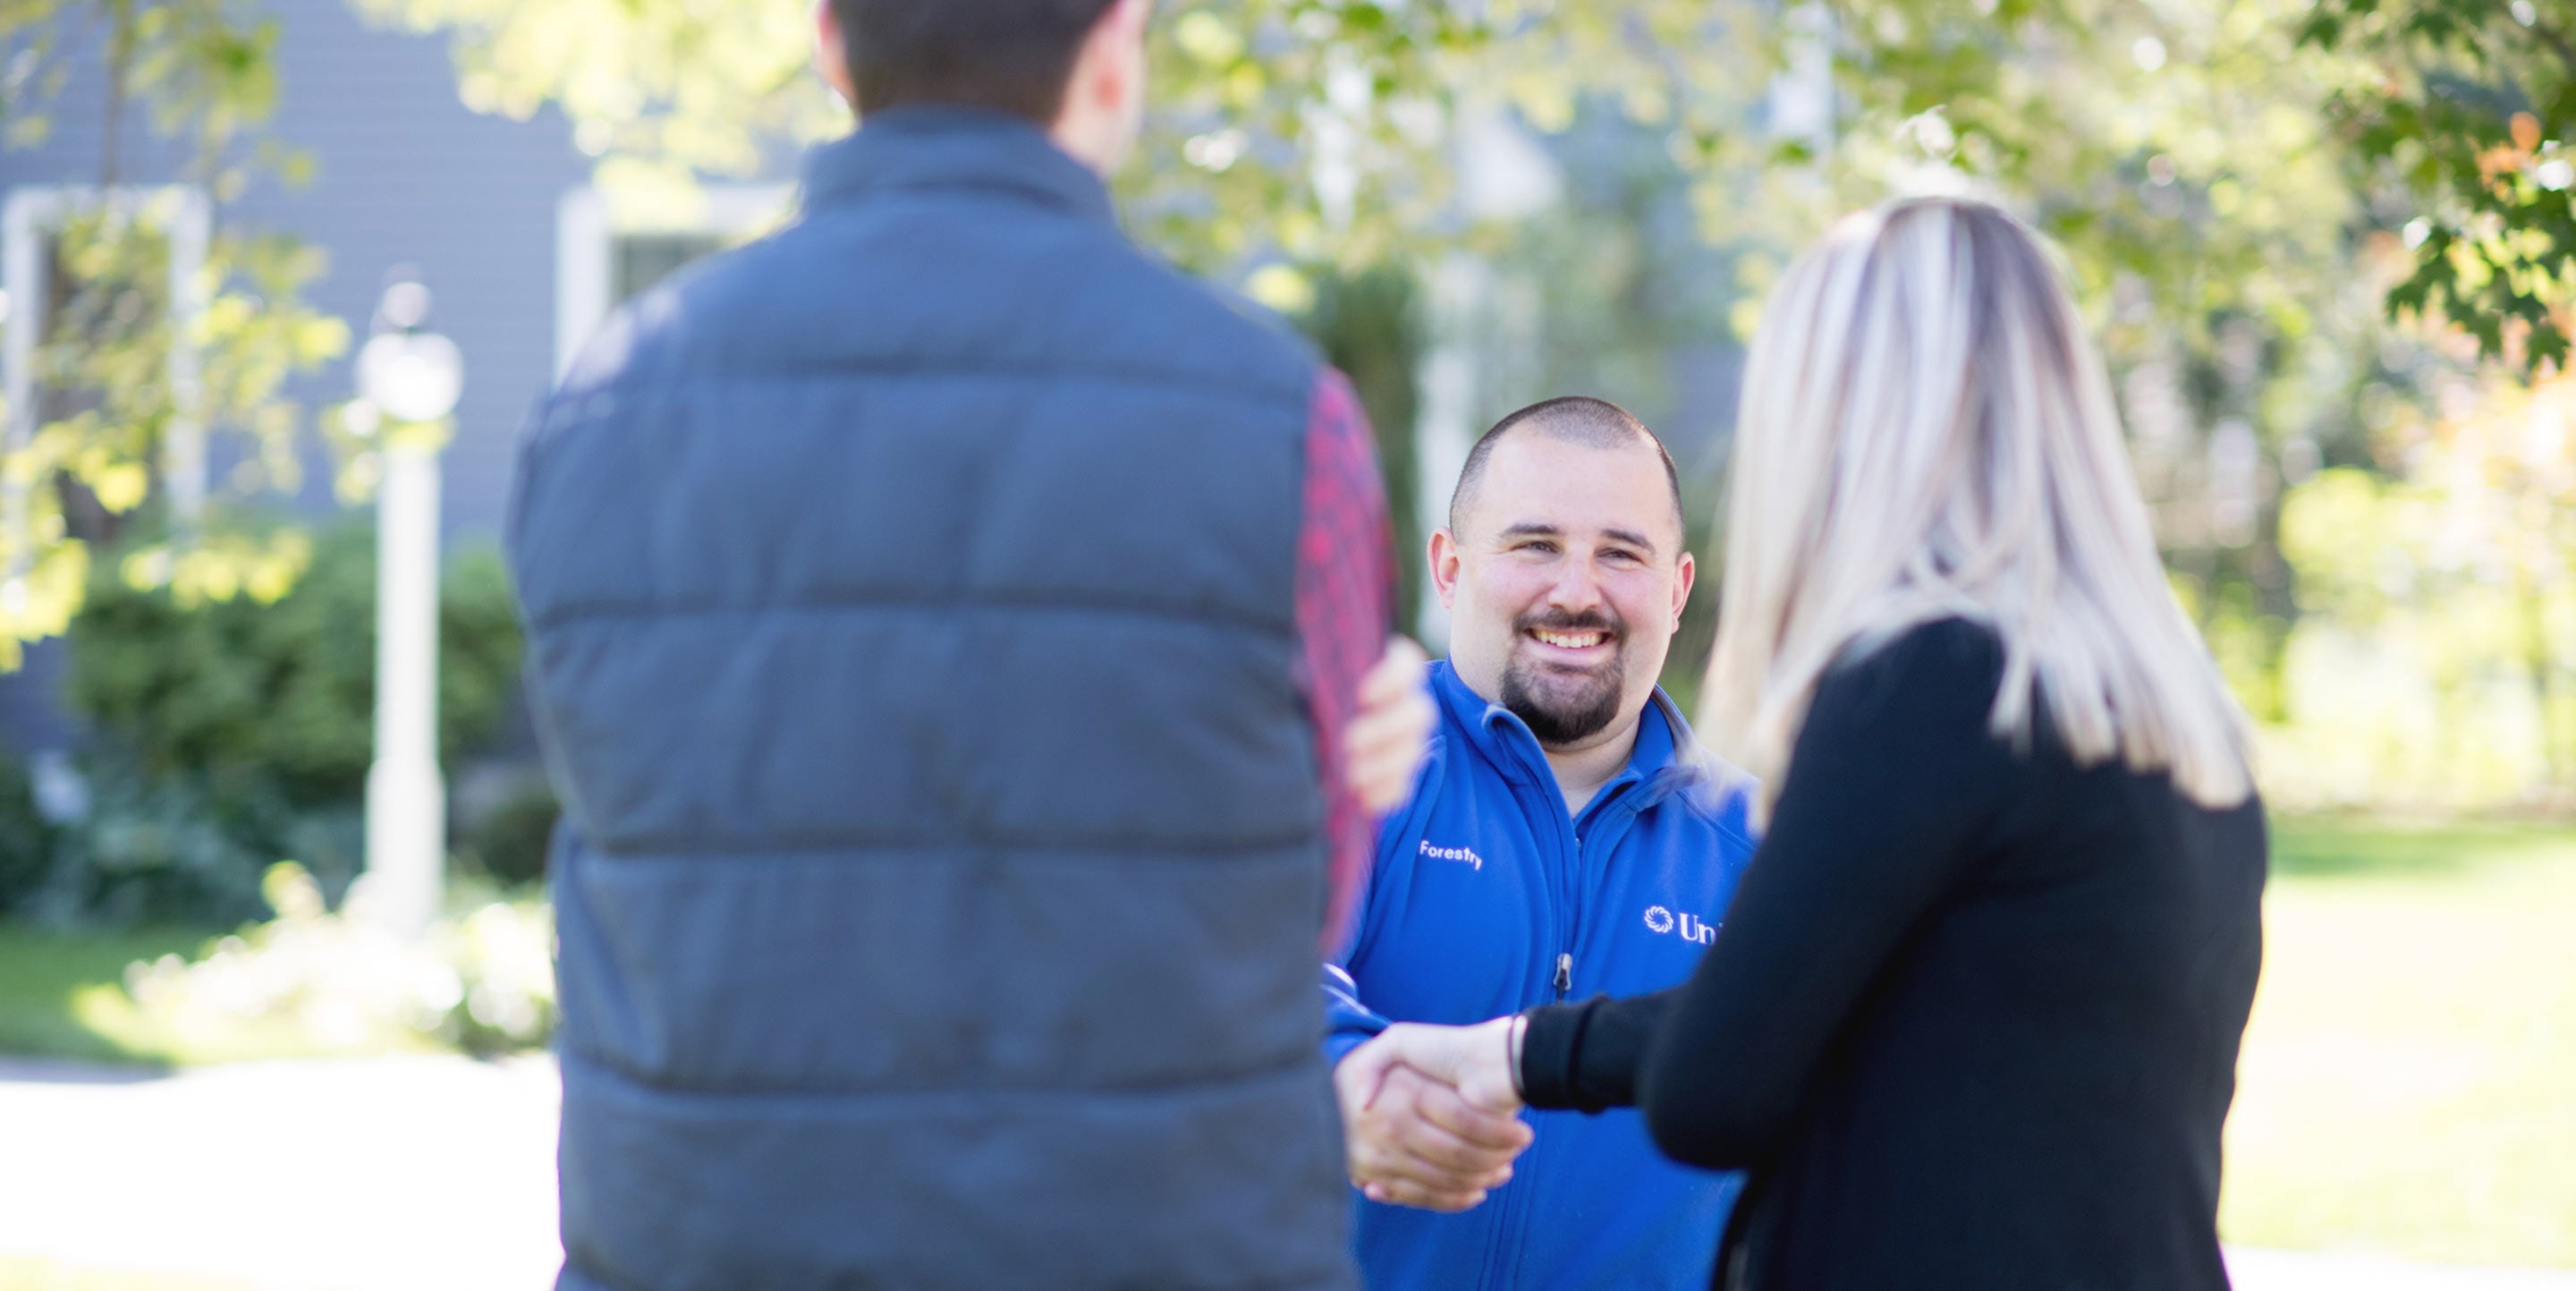 Unitil employee shaking hands with customers in yard